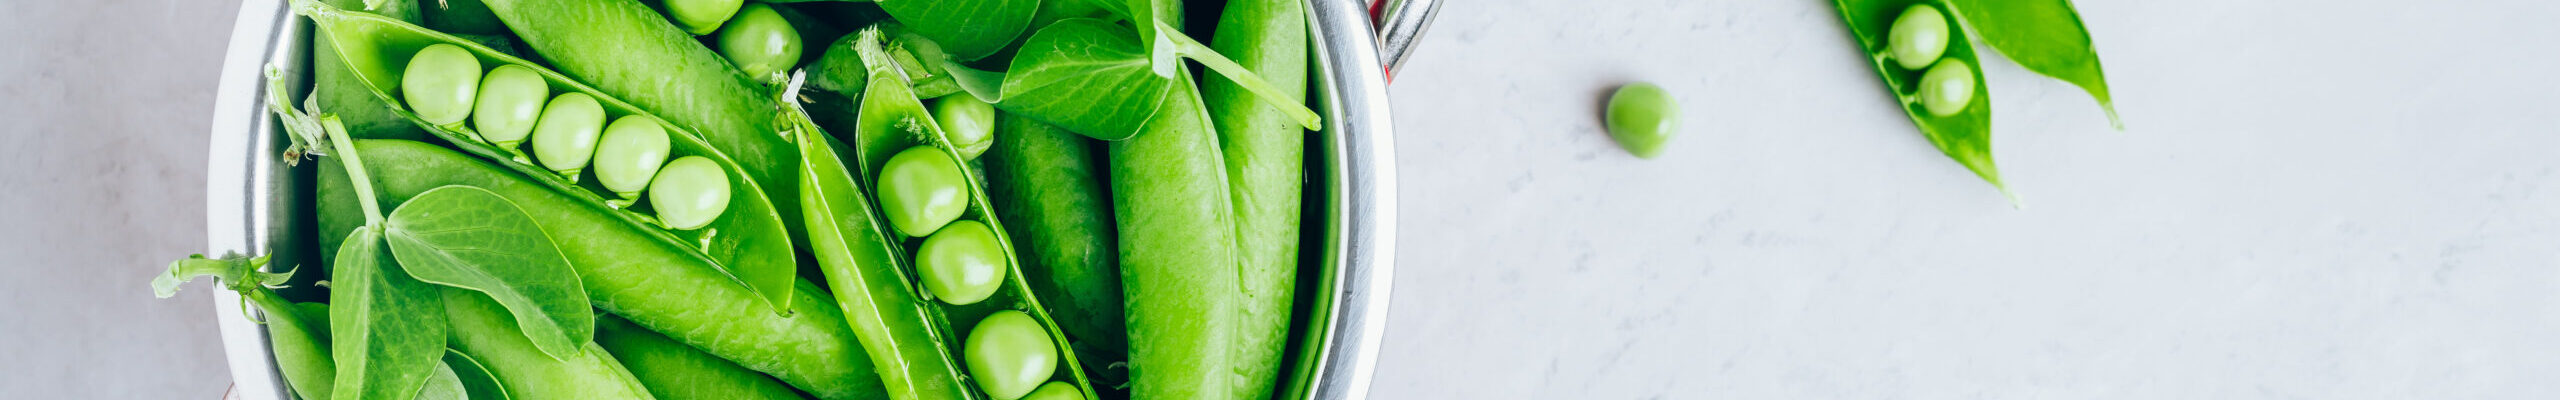 Organic Fresh Raw Green Peas in a colander on gray stone background, top view